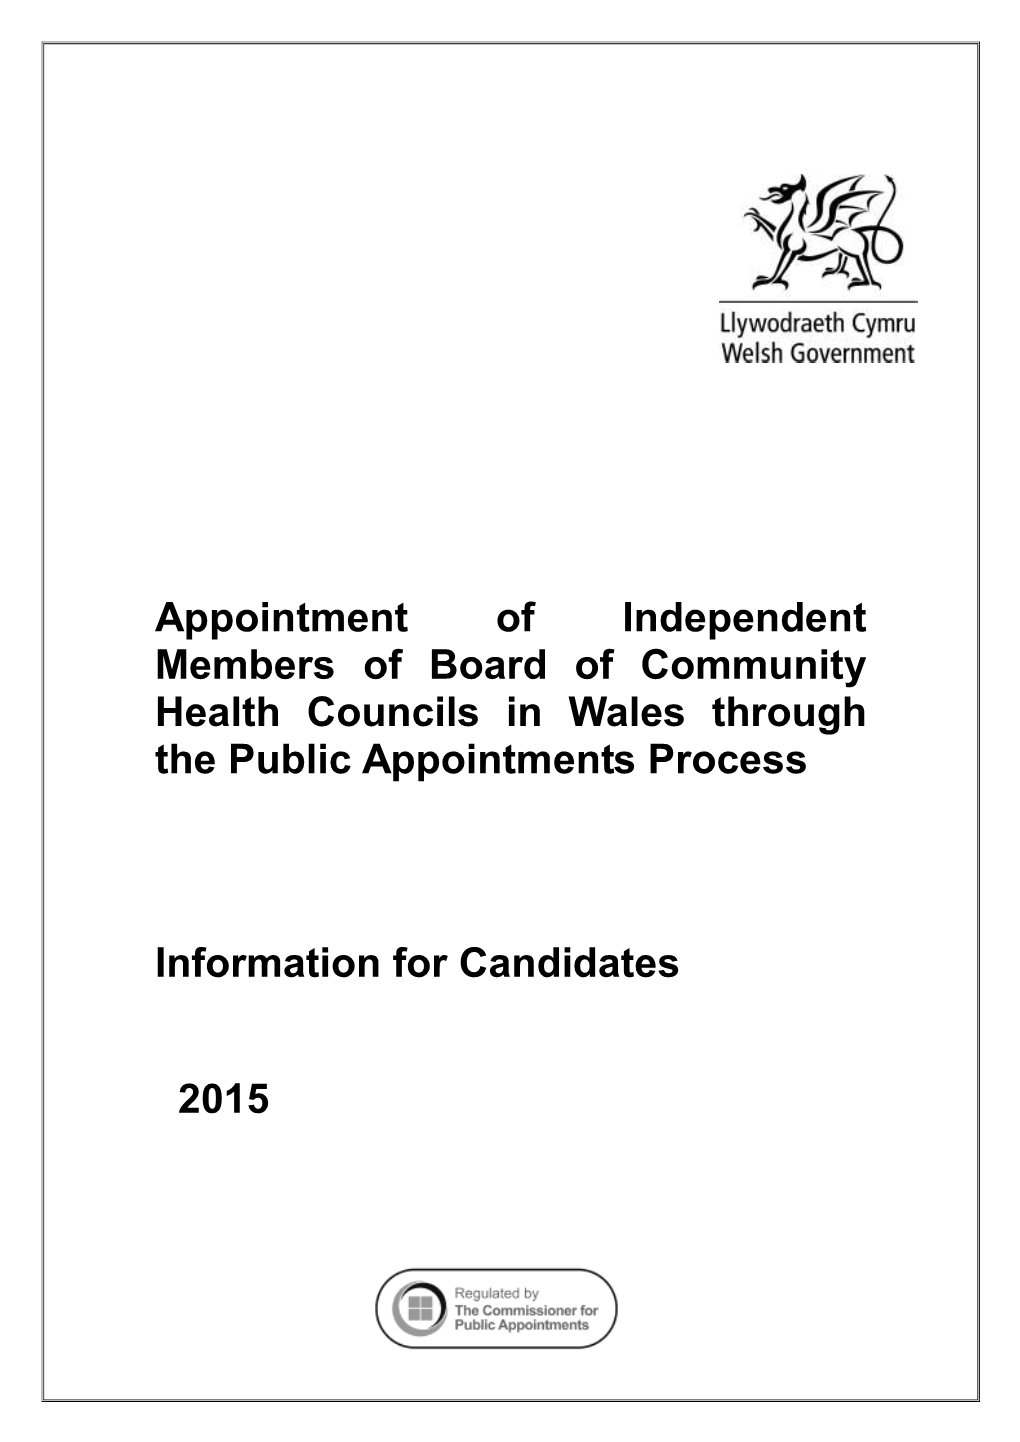 Appointment of Independent Members of Board of Community Health Councils in Wales Through the Public Appointments Process